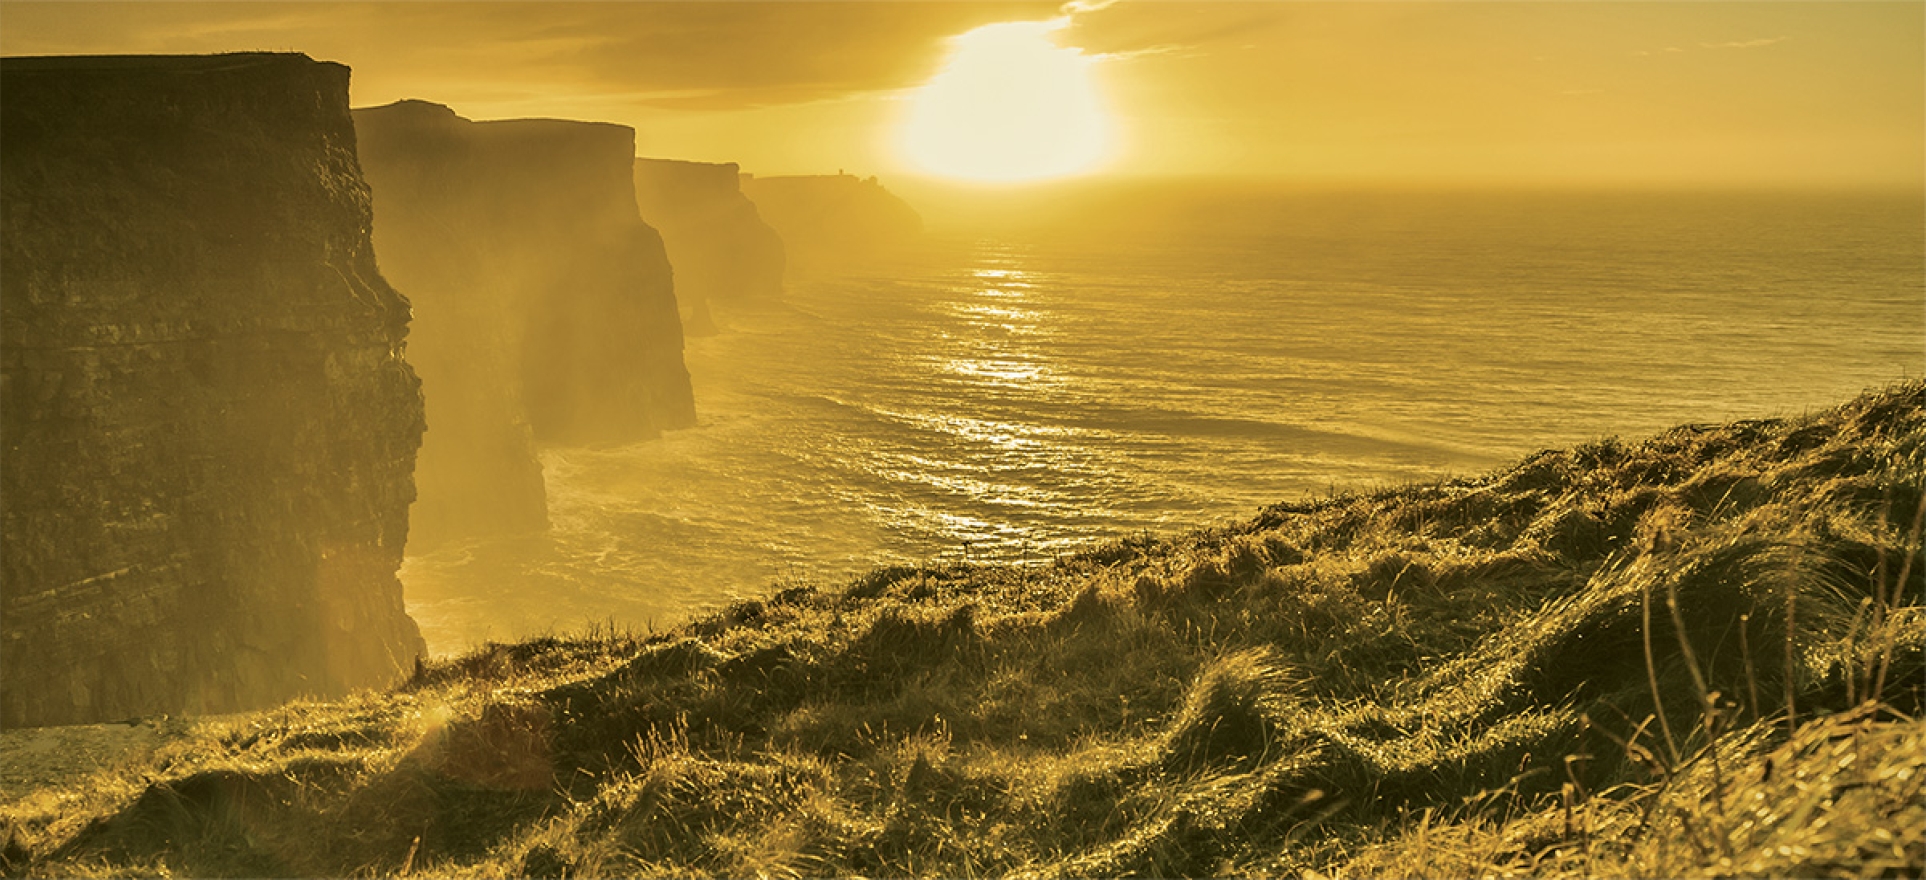 The cliff of moher in Ireland at sunset